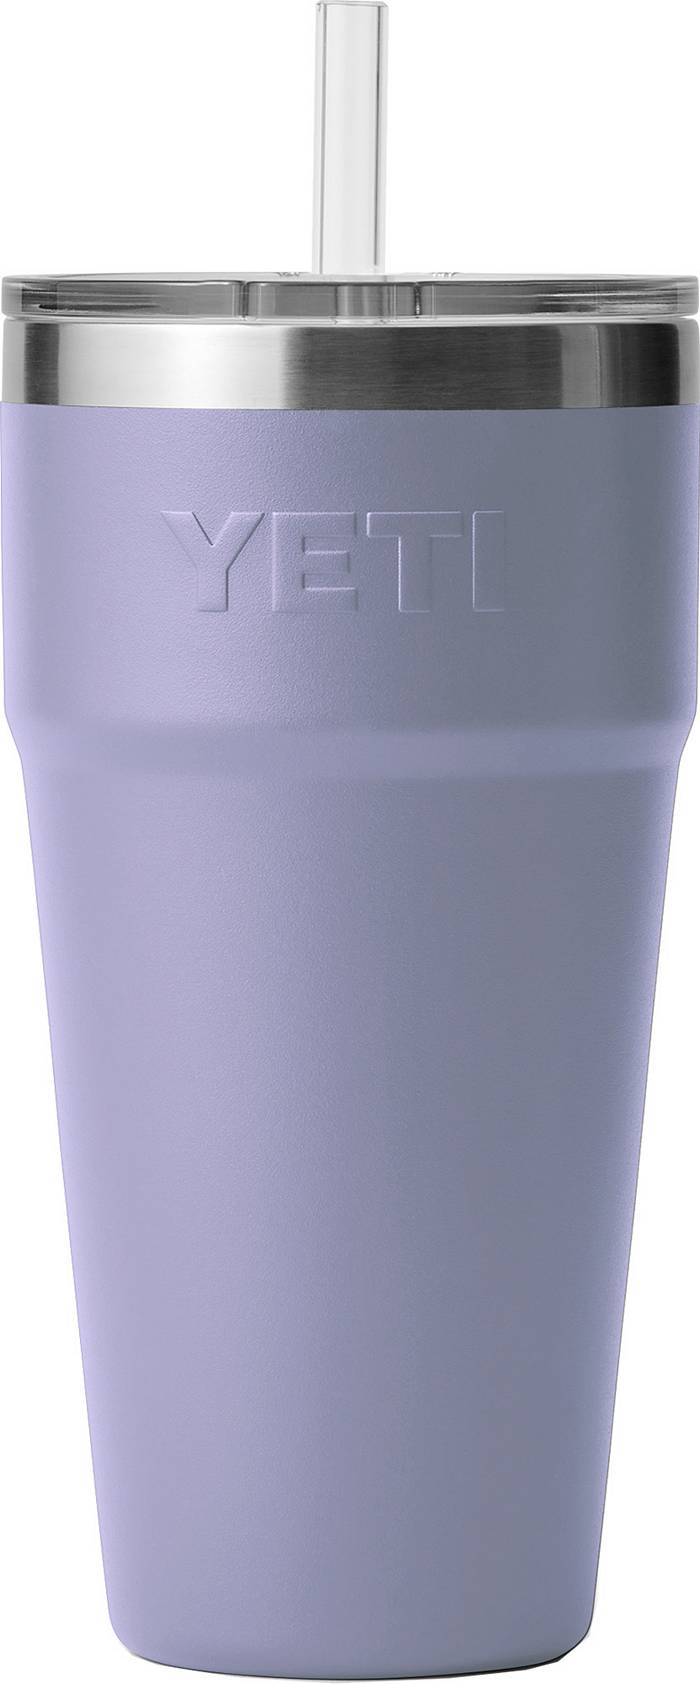 Yeti Rambler 26 oz Cup w/ Straw Lid in Limited Edition “Cosmic Lilac” for  sale online